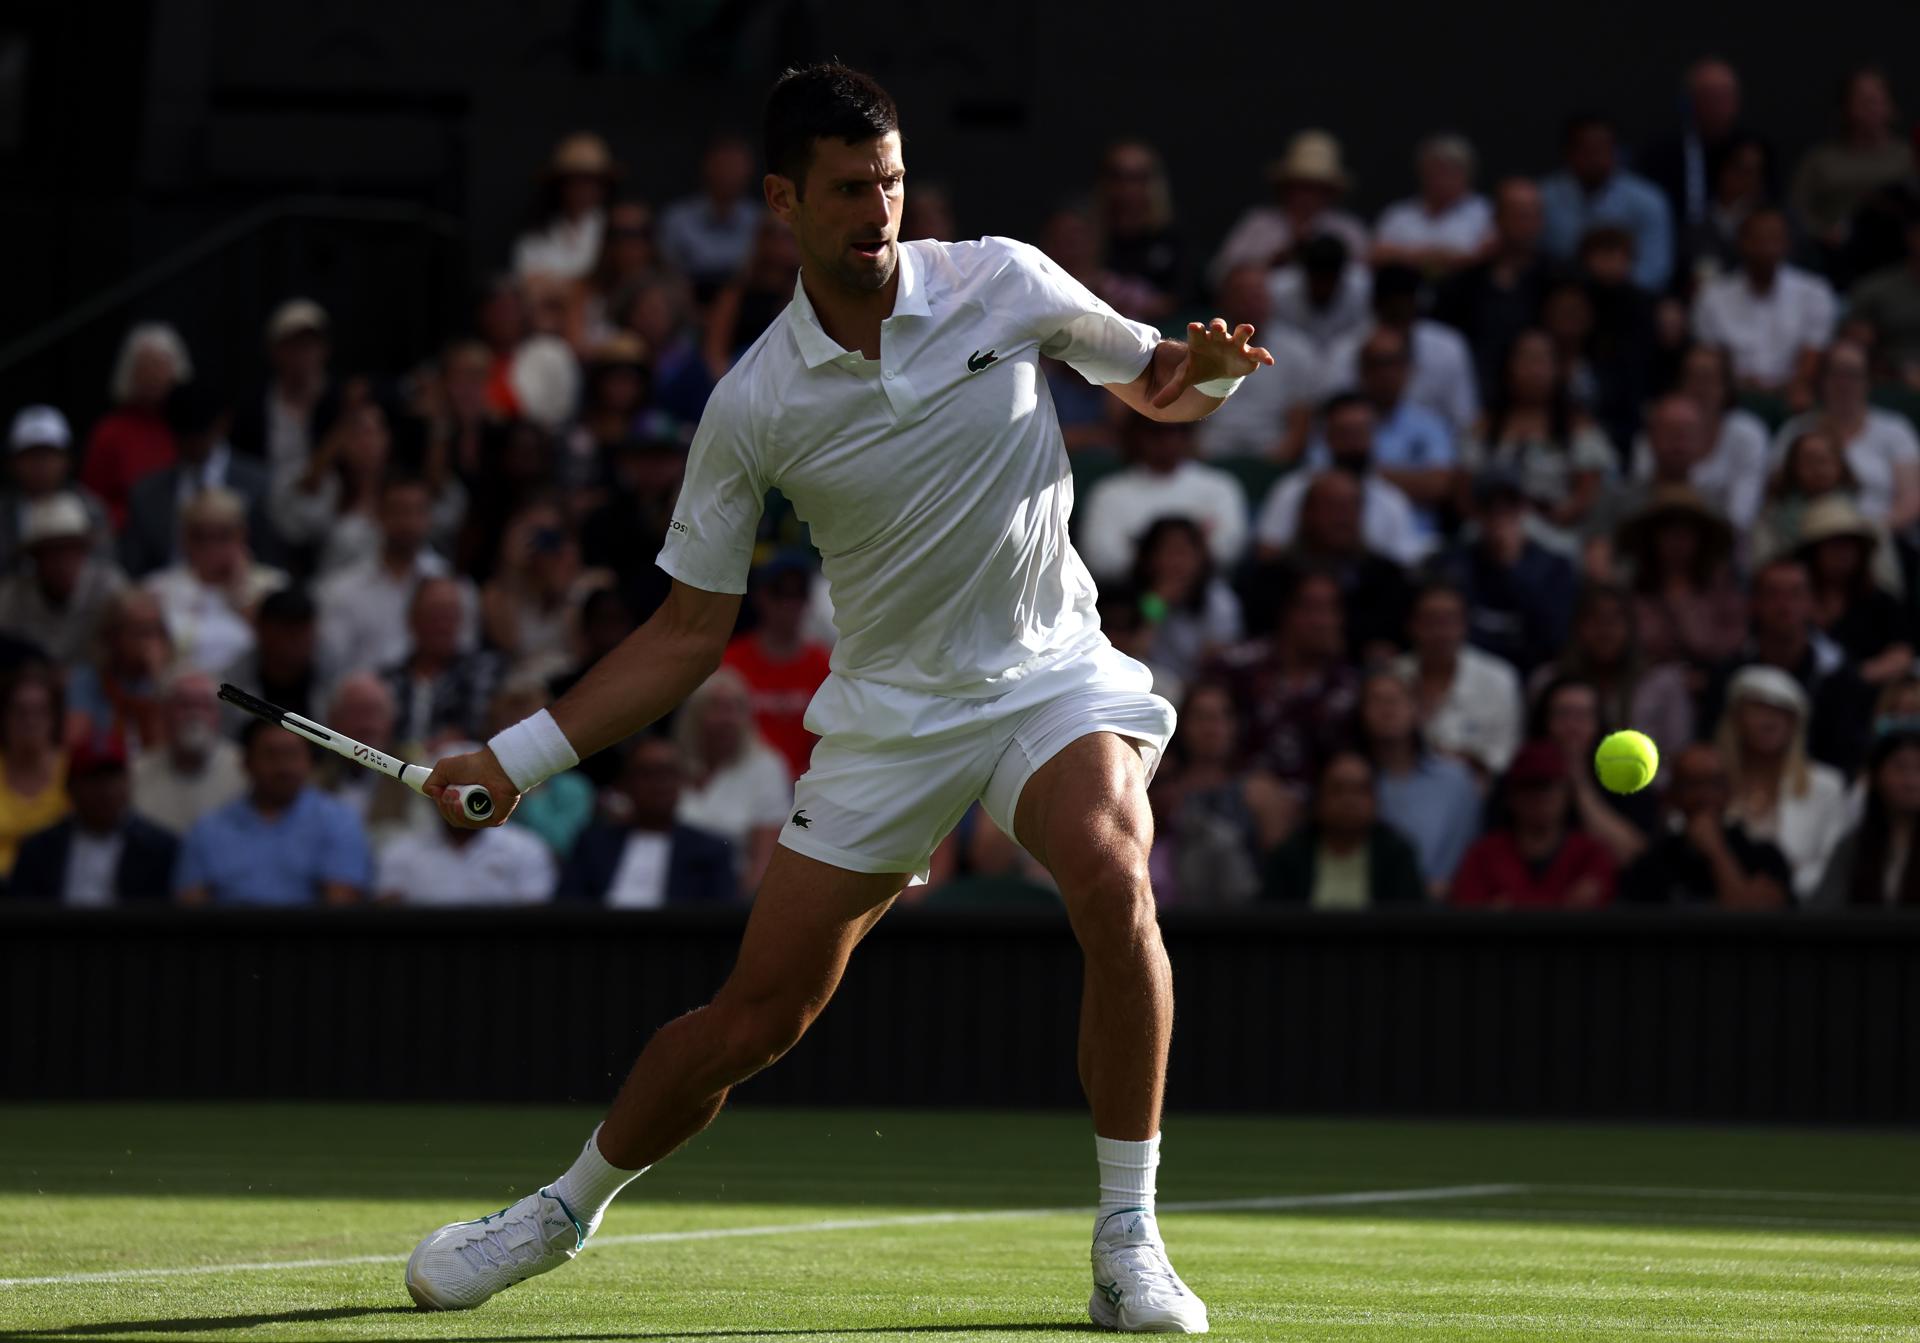 Novak Djokovic of Serbia prepares to hit a forehand during his second-round match against Jordan Thompson of Australia at the Wimbledon Championships, Wimbledon, Britain, on 5 July 2023. Djokovic won 6-3, 7-6 (7-4), 7-5. EFE/EPA/NEIL HALL EDITORIAL USE ONLY